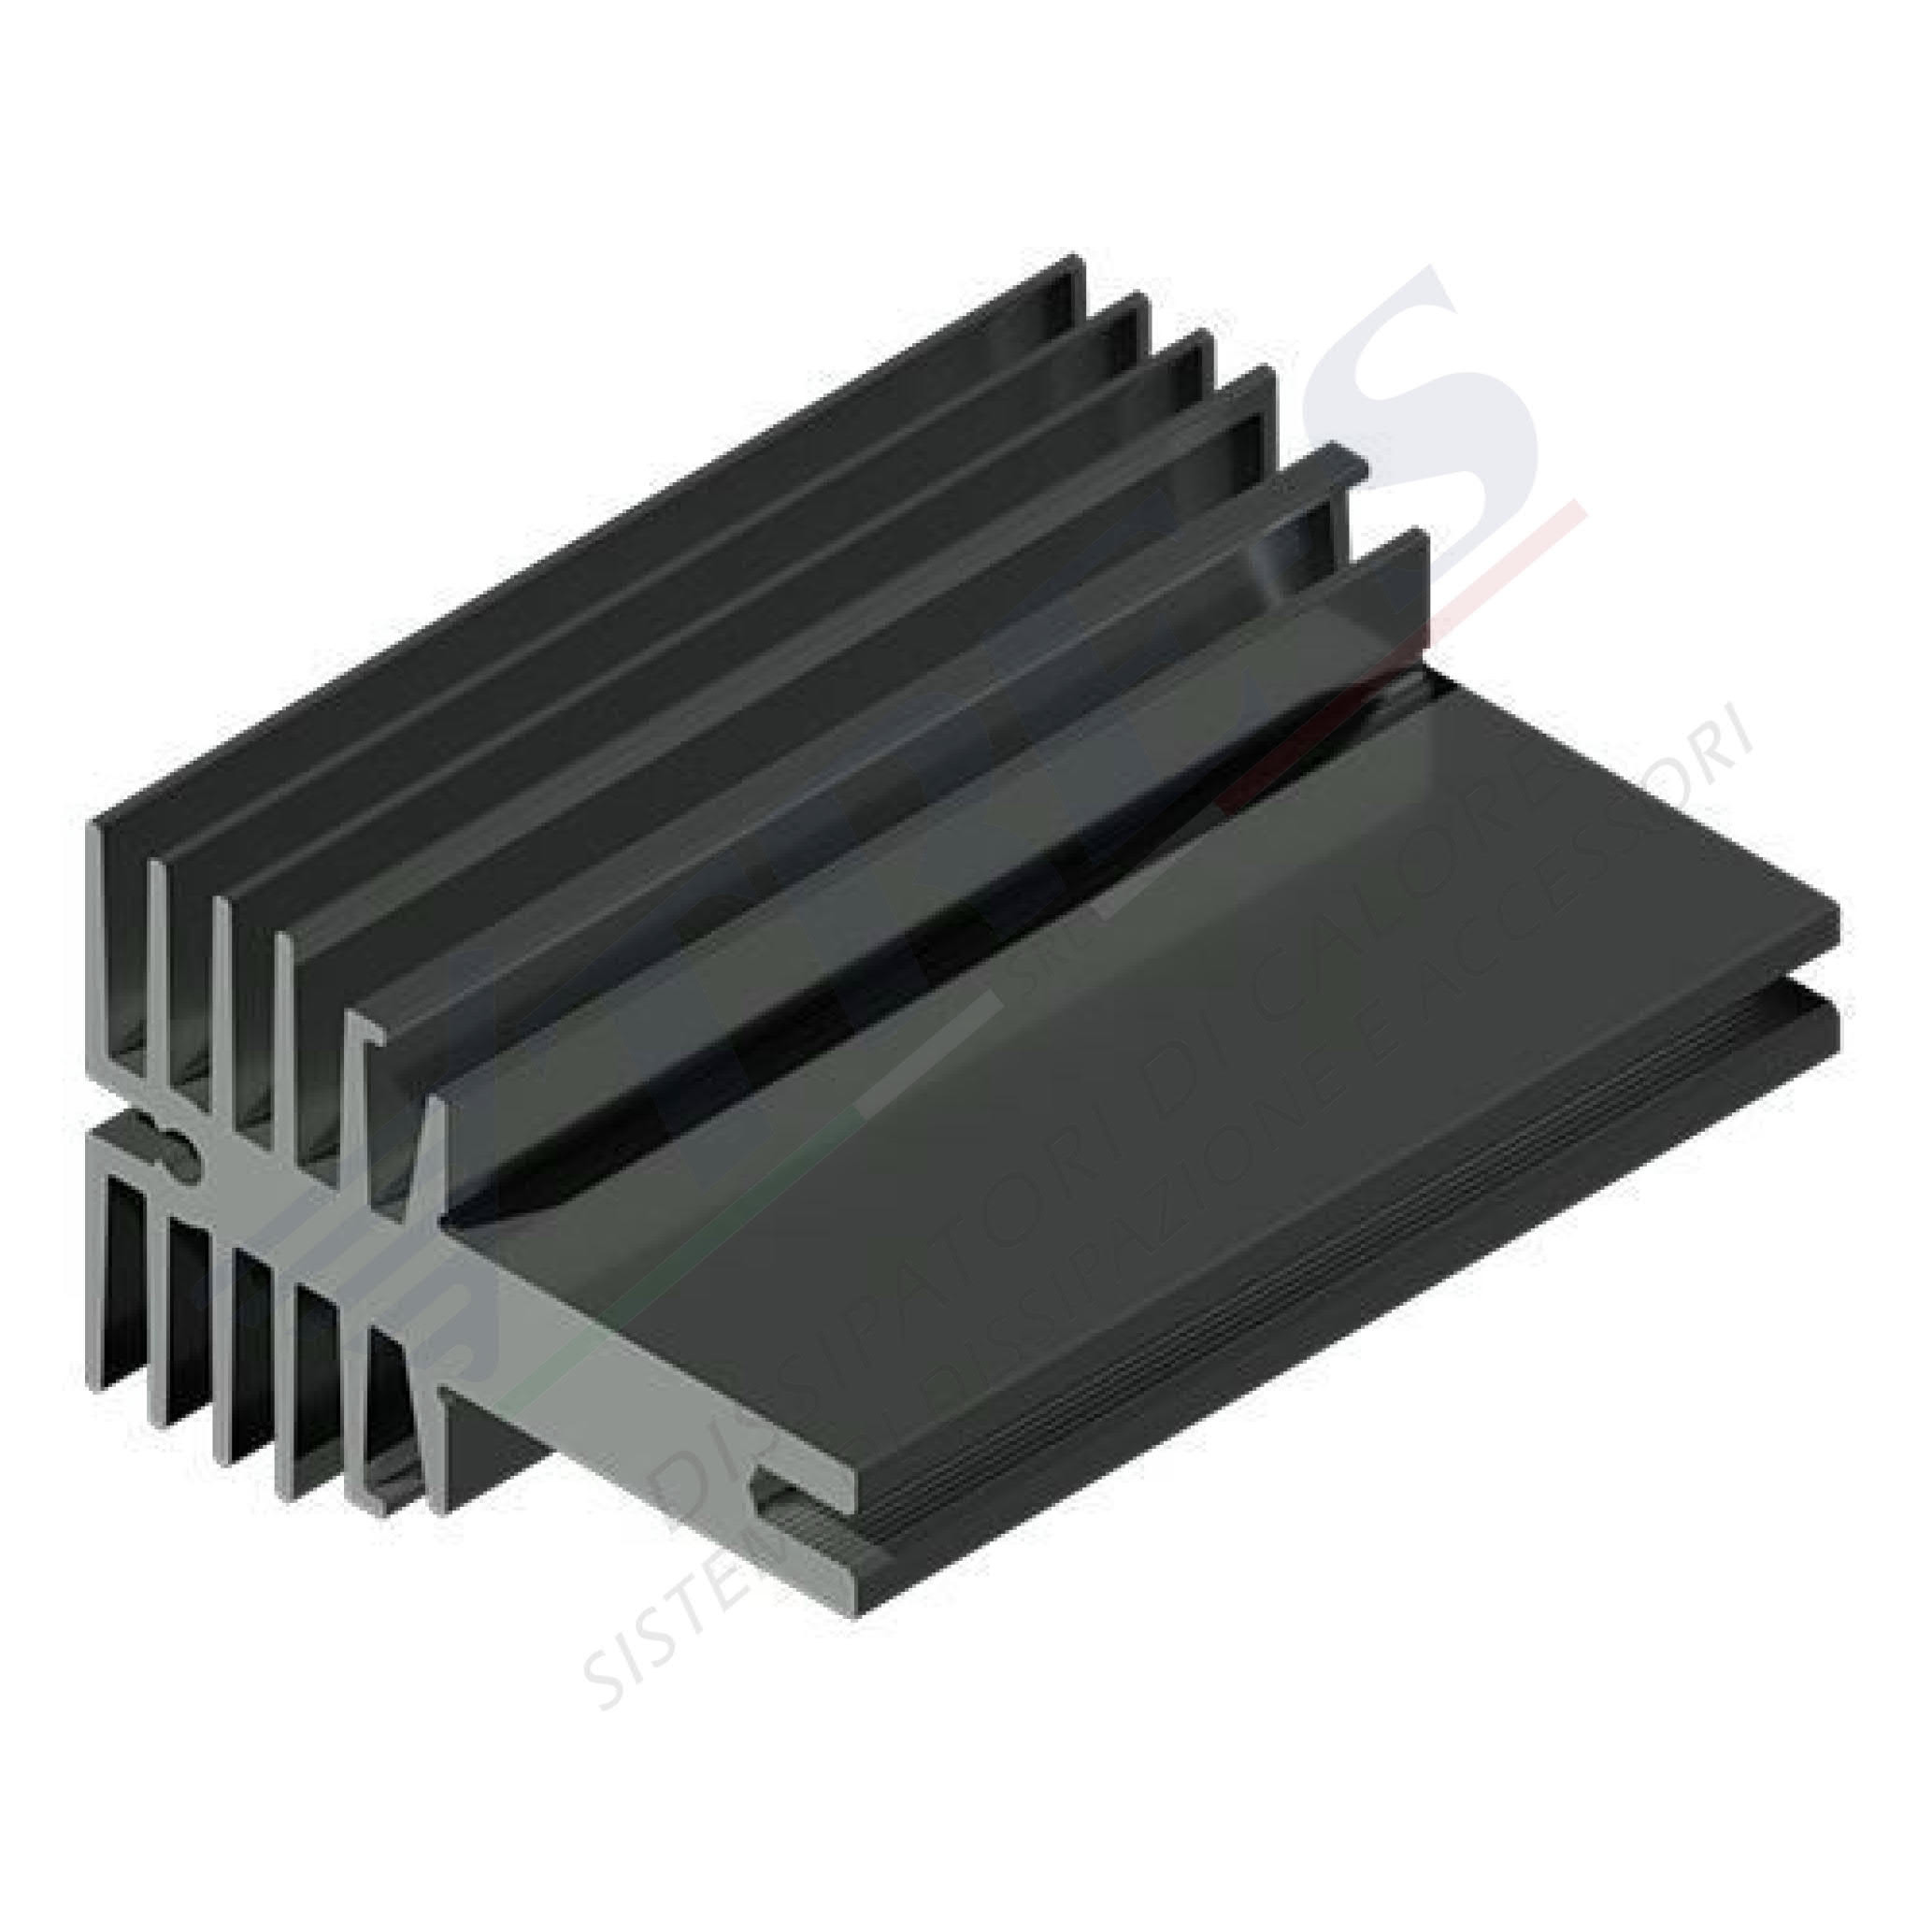 PRO1298 - Heat sinks with clip system